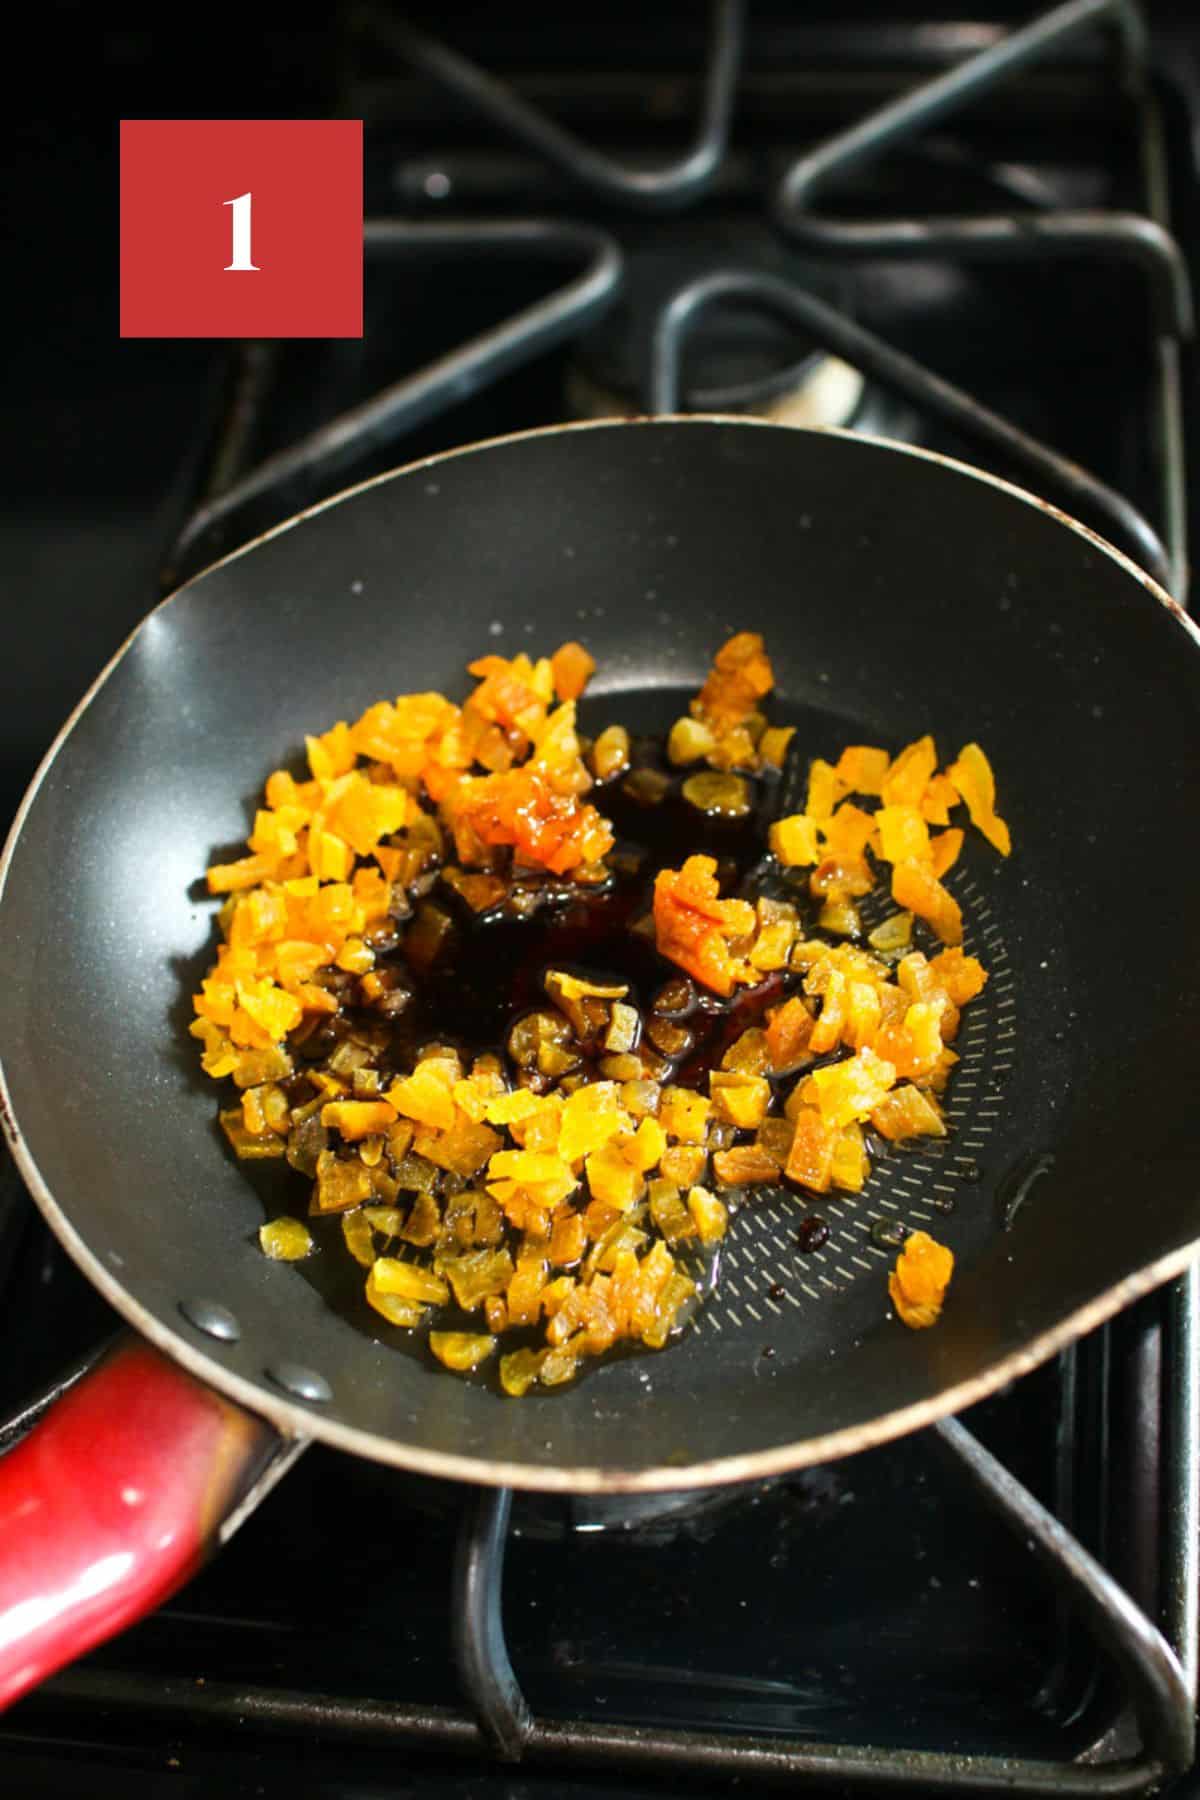 A small pan on a gas stove top. In the ban is small diced apricots, balsamic vinegar, and other ingredients. In the upper left corner is a dark red square with a white '1' in the center.